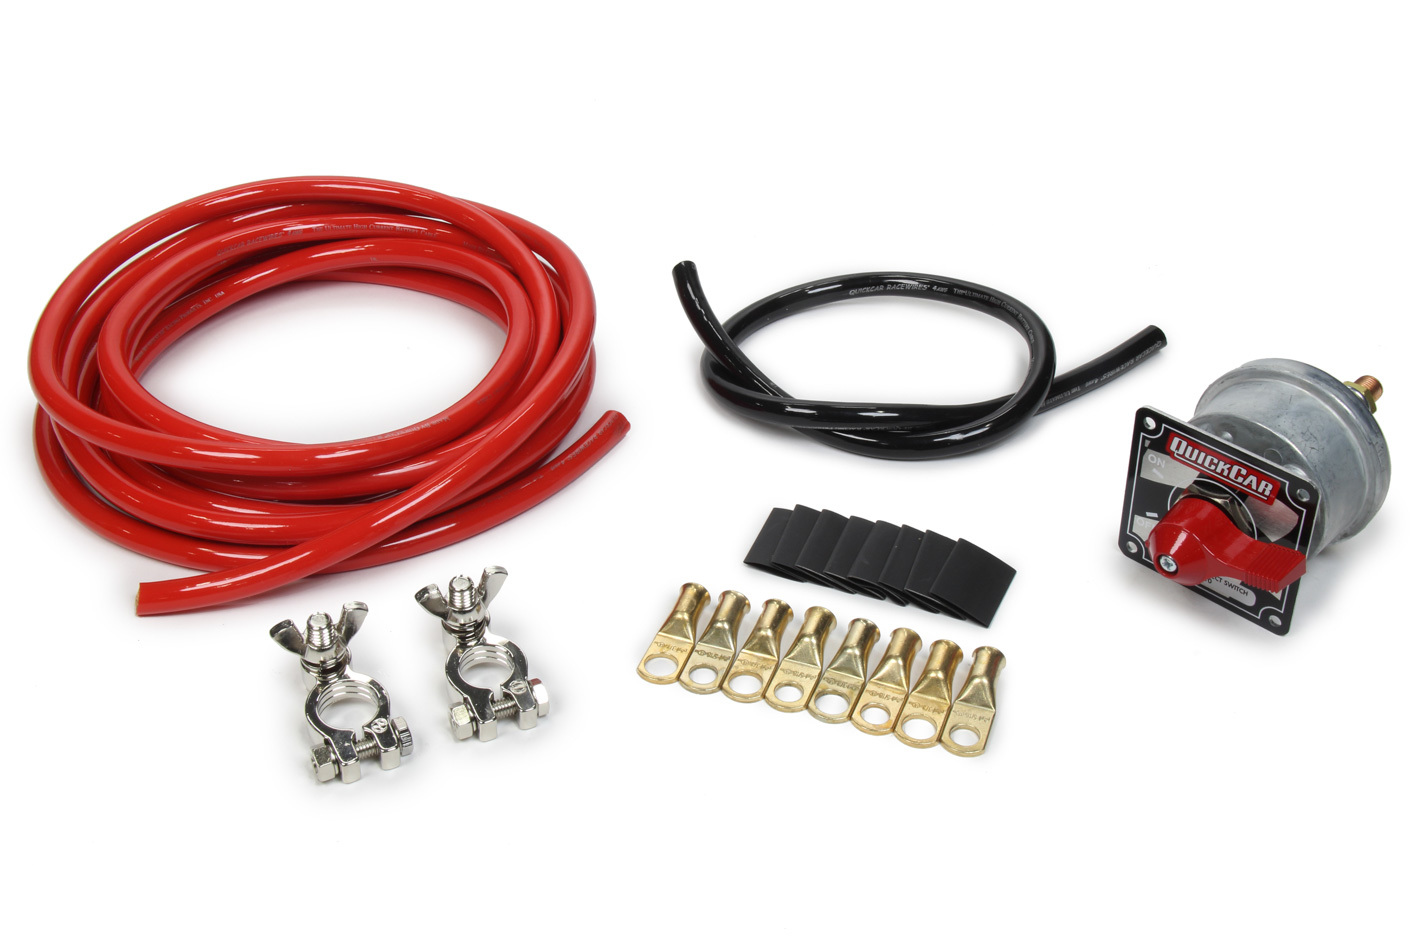 QuickCar 57-014 Battery Cable Kit, 4 Gauge, Top Mount Battery Terminals, Disconnect Switch / Terminals / Heat Shrink Included, 15 ft Red / 2 ft Black, Kit